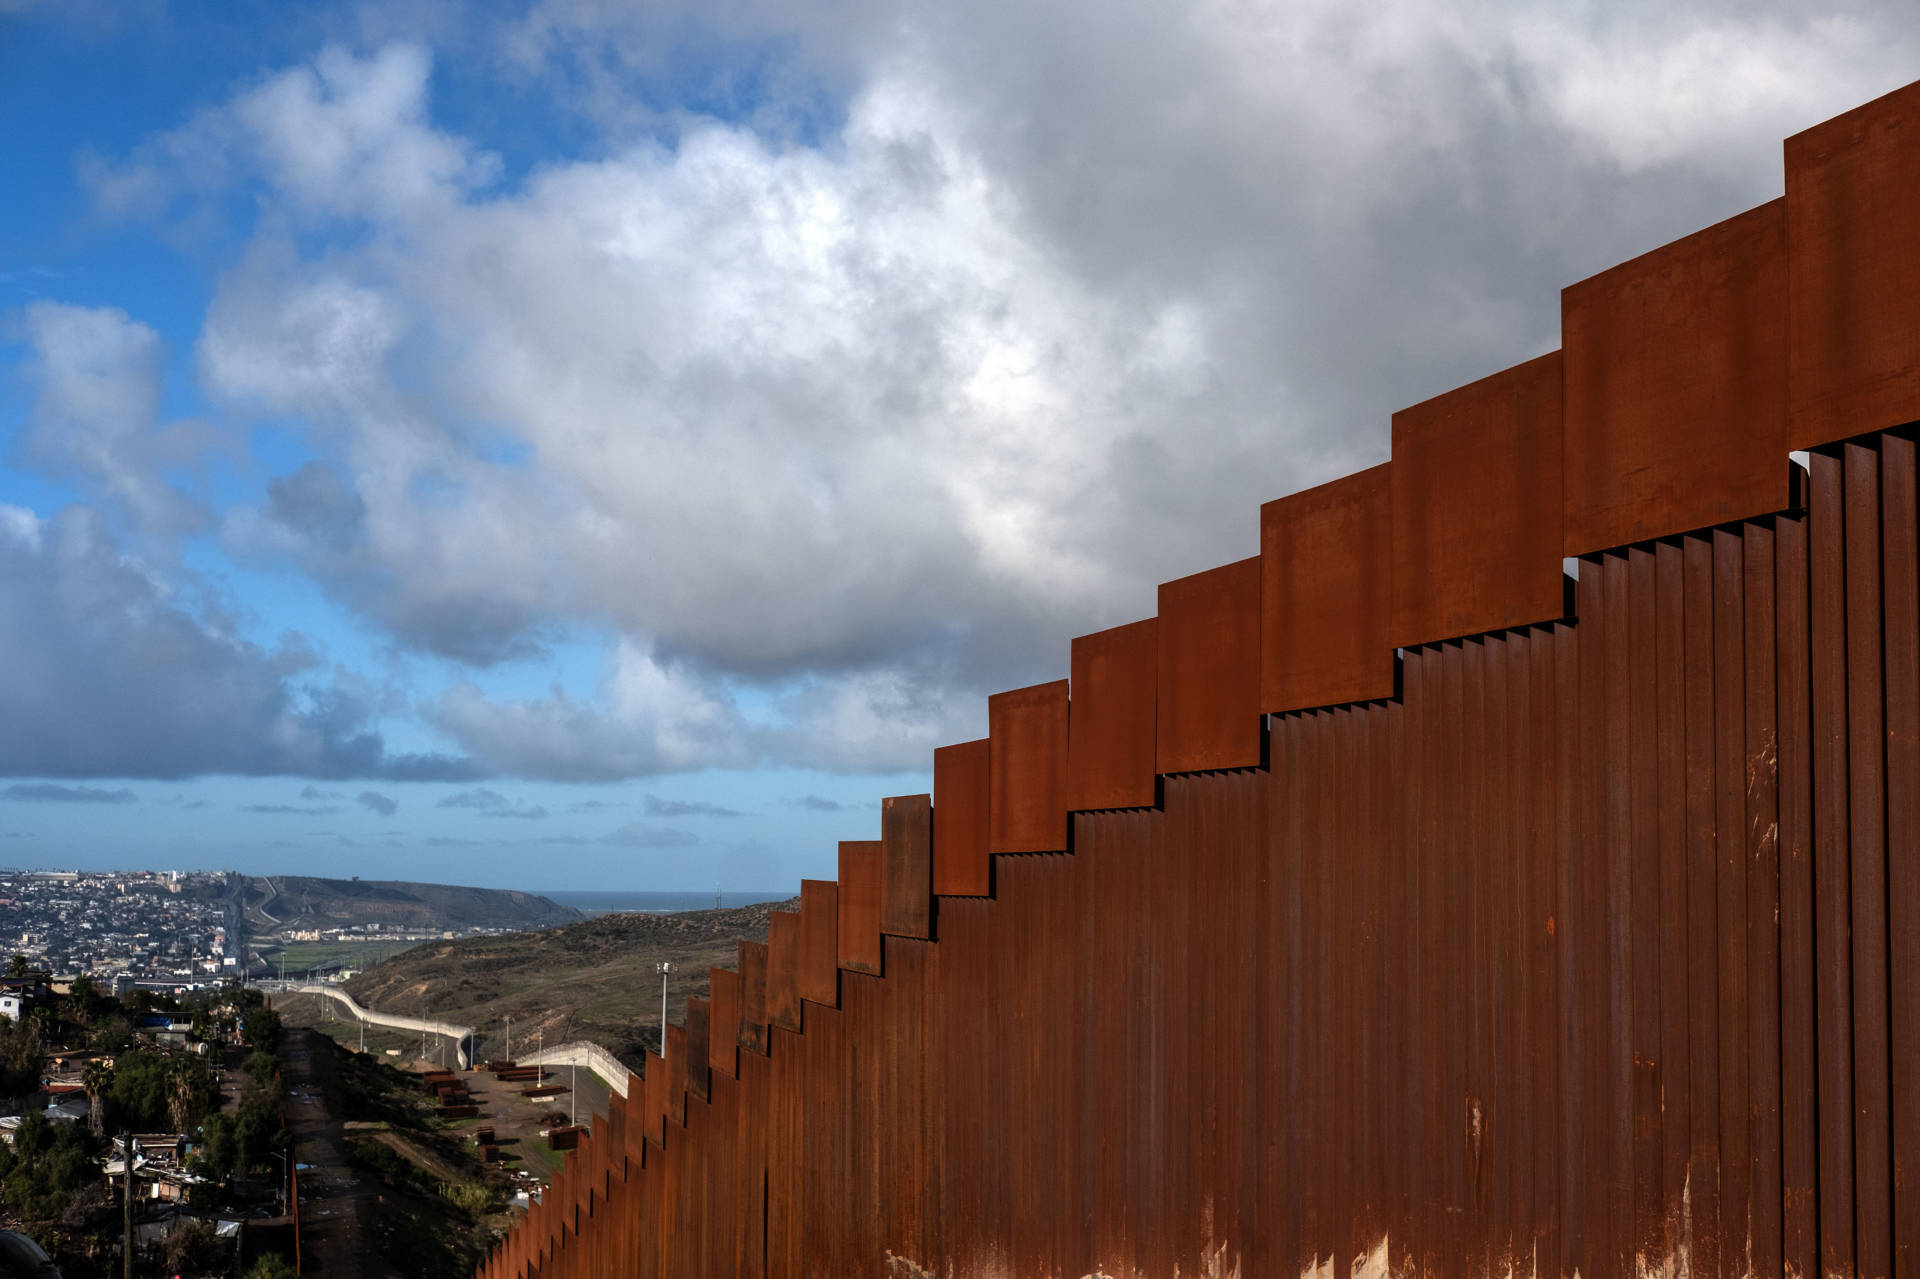 A section of the reinforced U.S.-Mexico border fence as seen from Tijuana, Mexico, on Sunday. Guillermo Arias/AFP/Getty Images